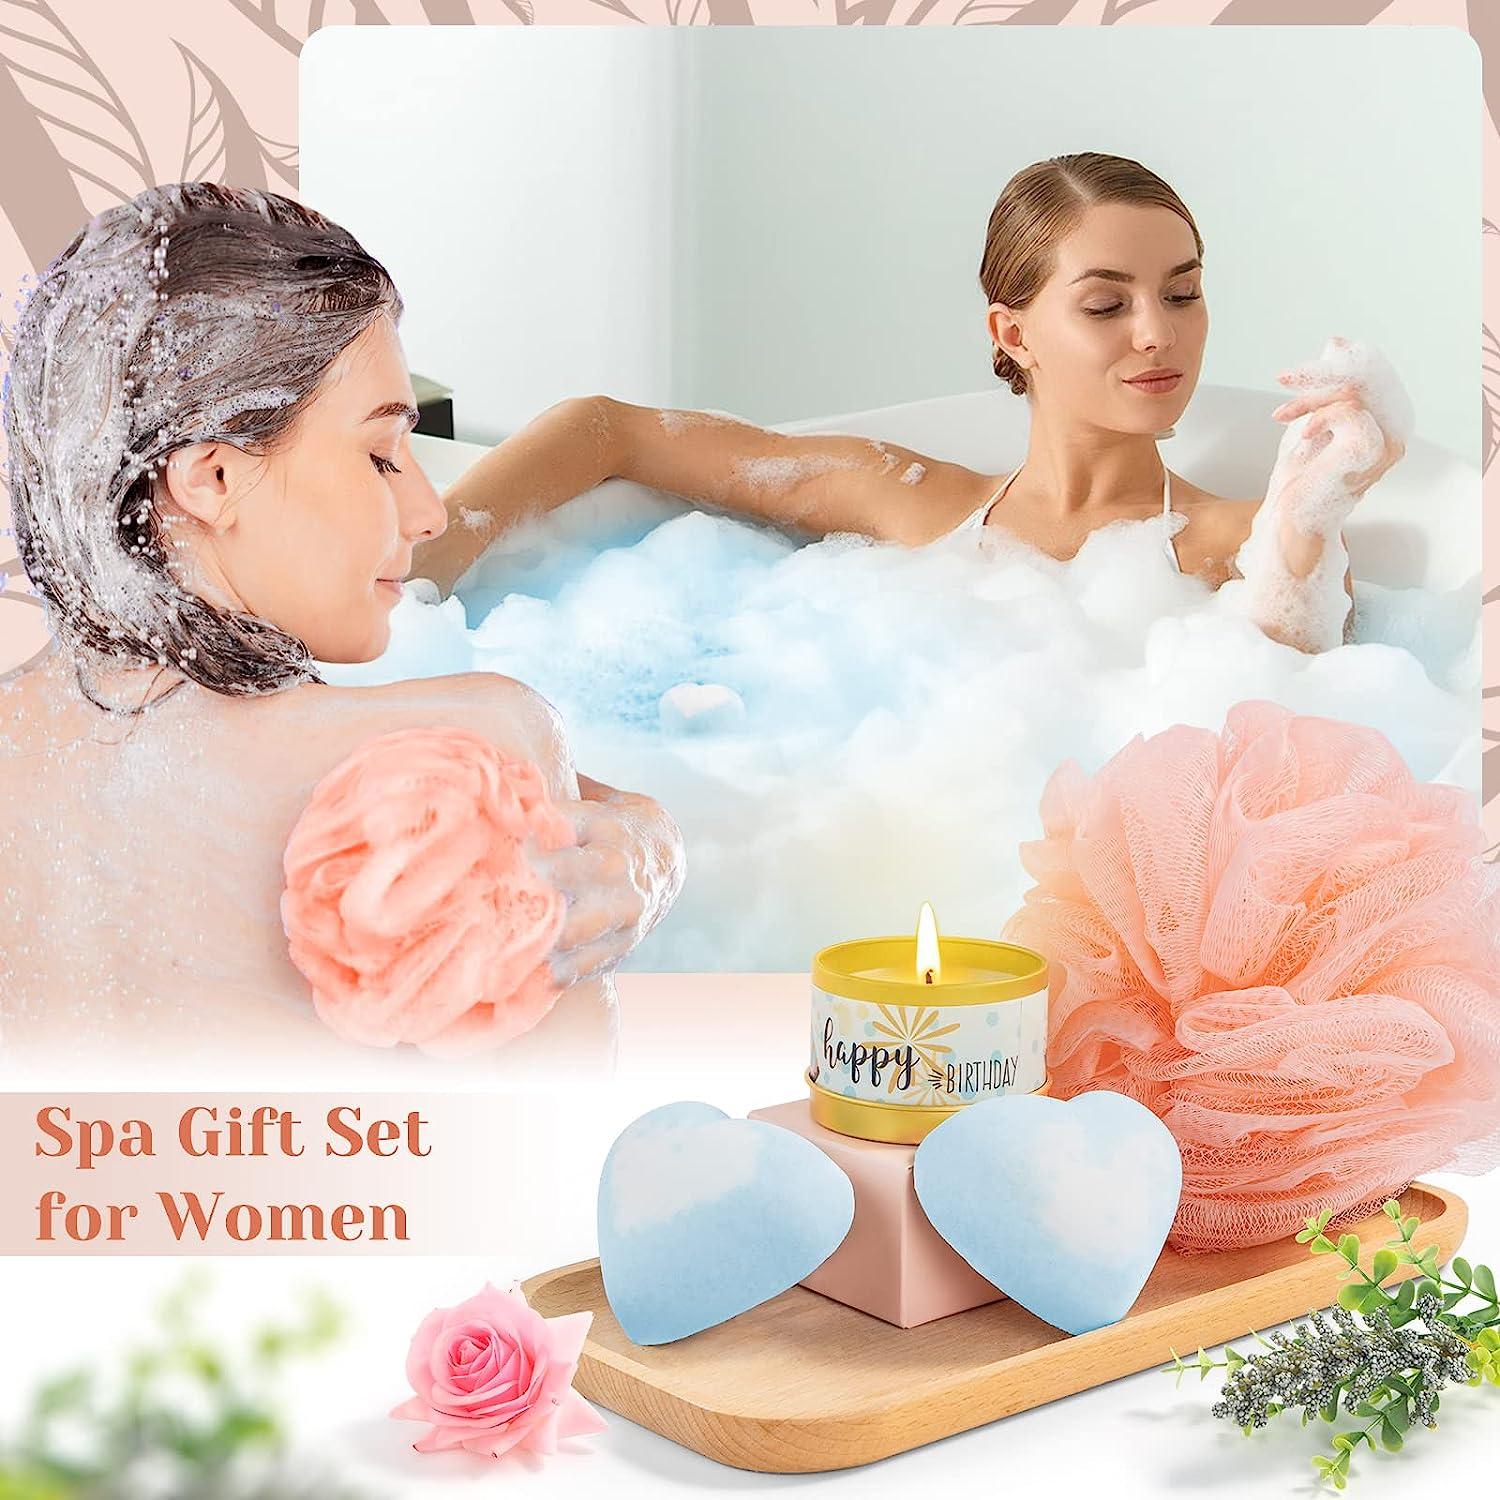 Birthday Gifts for Women,Relaxing Spa Gift for Women,Stainless Steel Unique  Happy Birthday/Mothers Day Bath Set Gift Box for Her Mom Sister Best